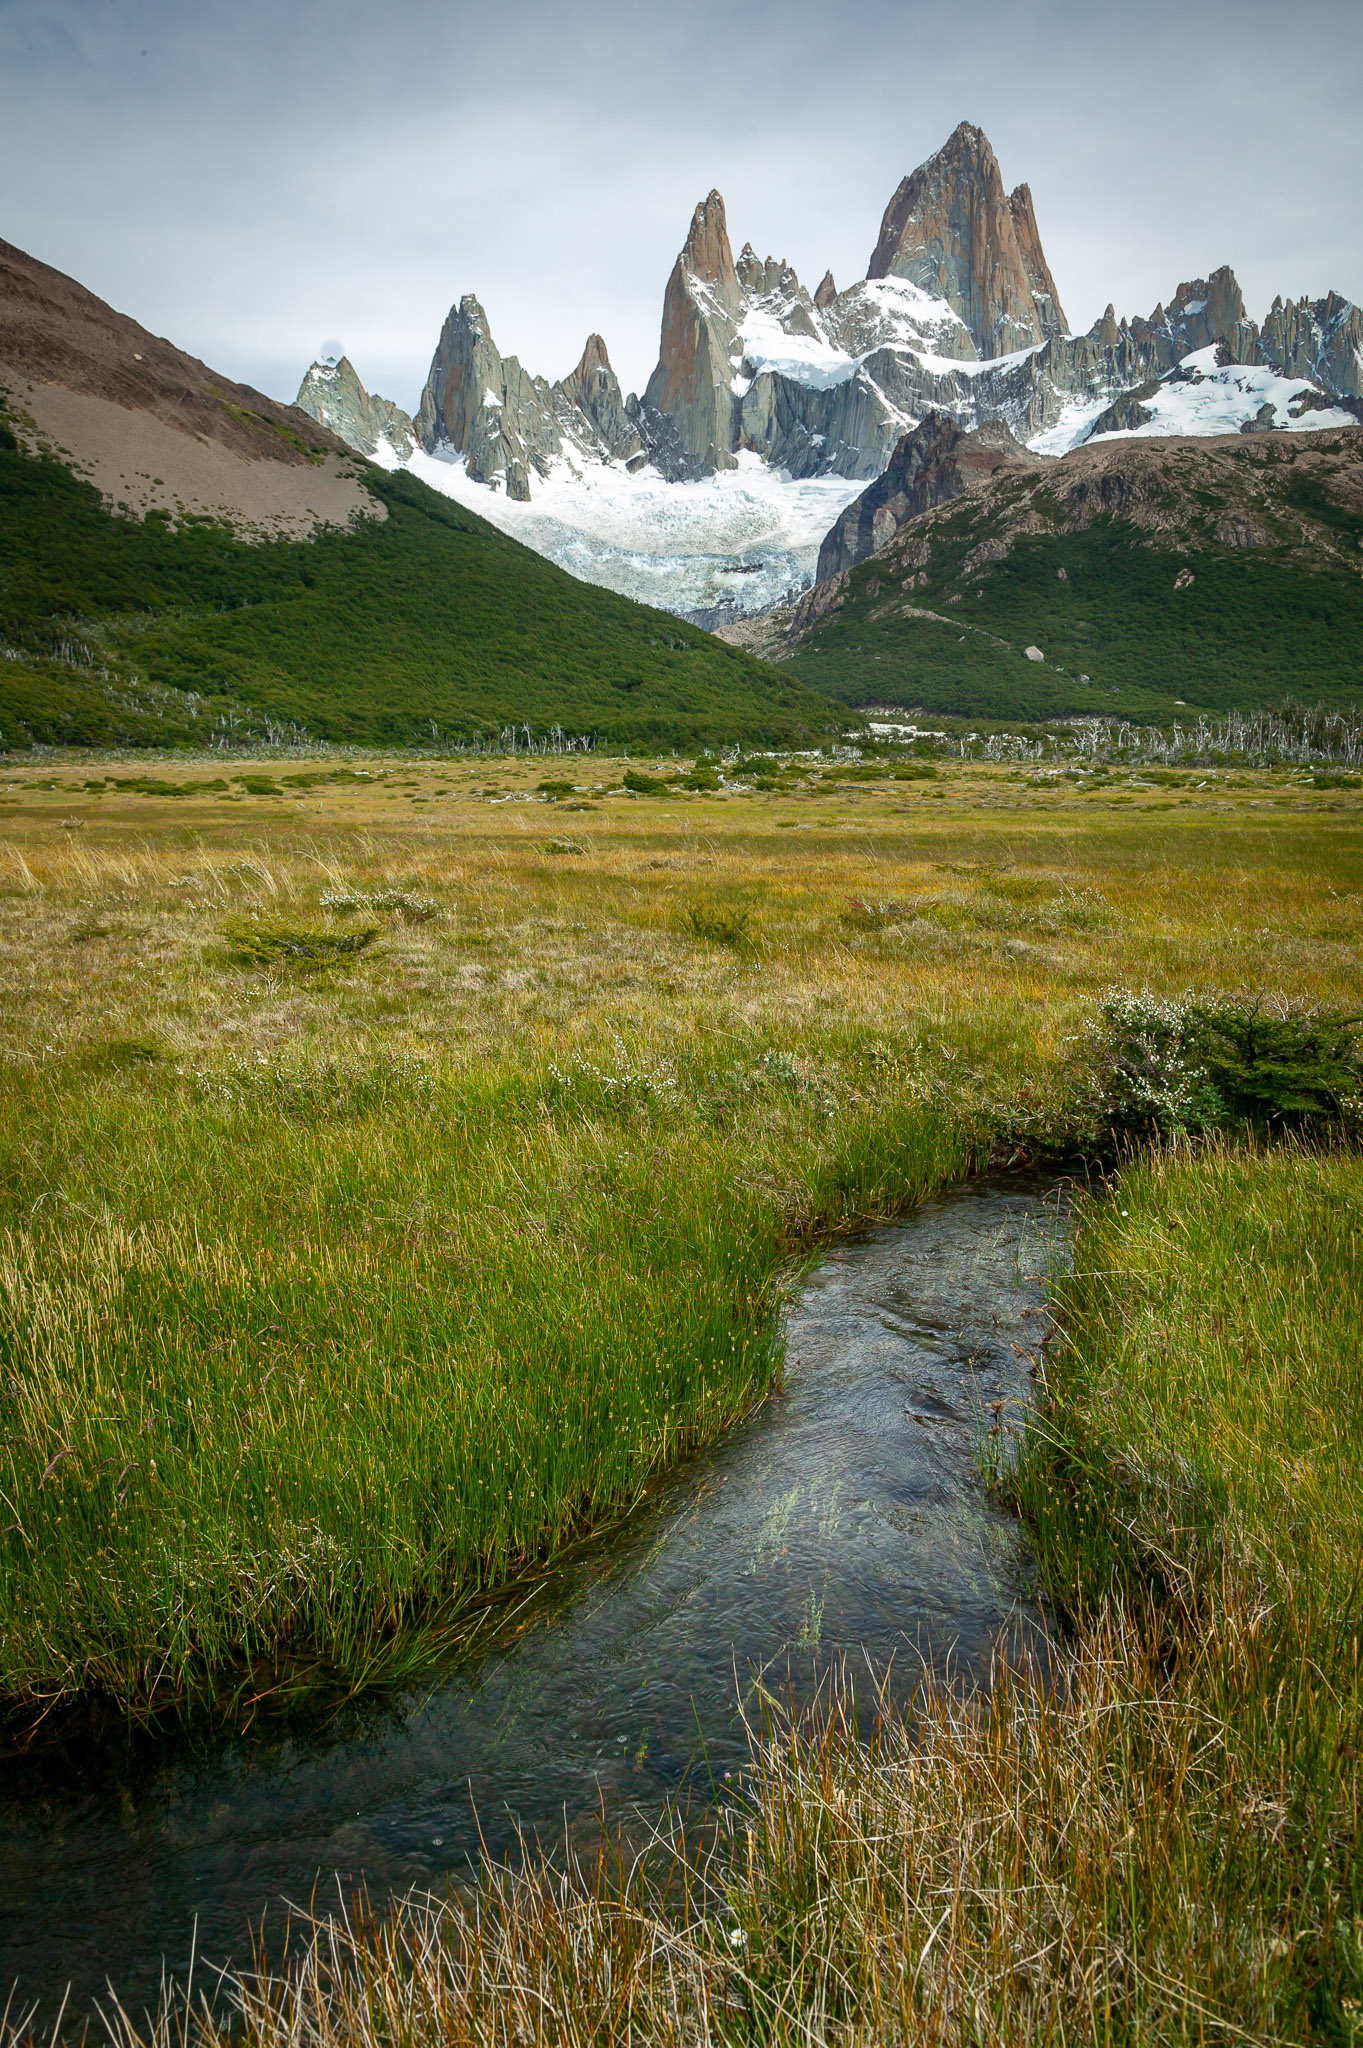 Fitz Roy with Cerro Poincenot to its left